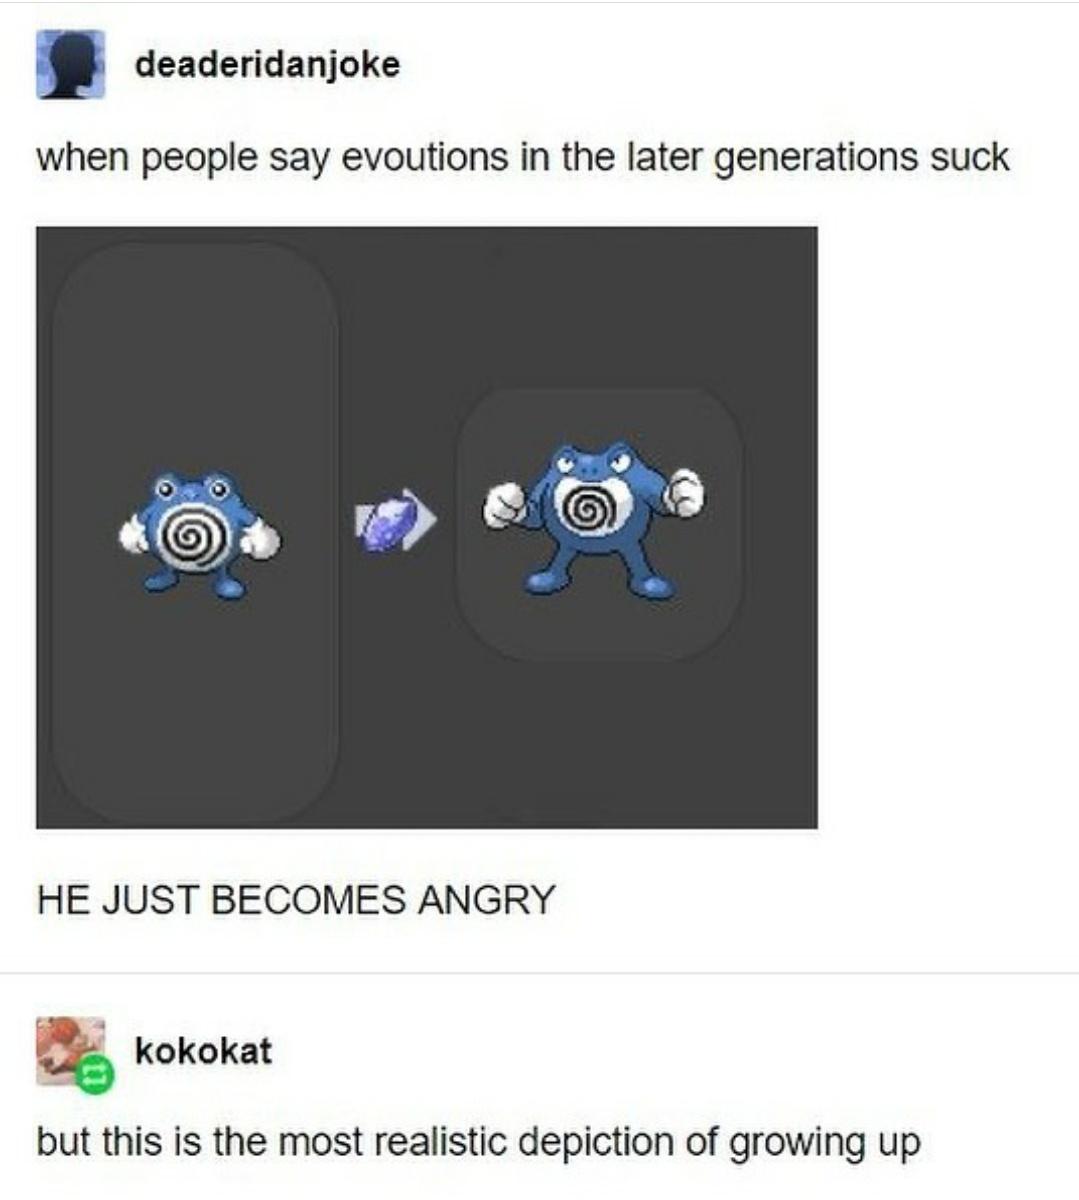 gaming memes - agender - deaderidanjoke when people say evoutions in the later generations suck He Just Becomes Angry kokokat but this is the most realistic depiction of growing up